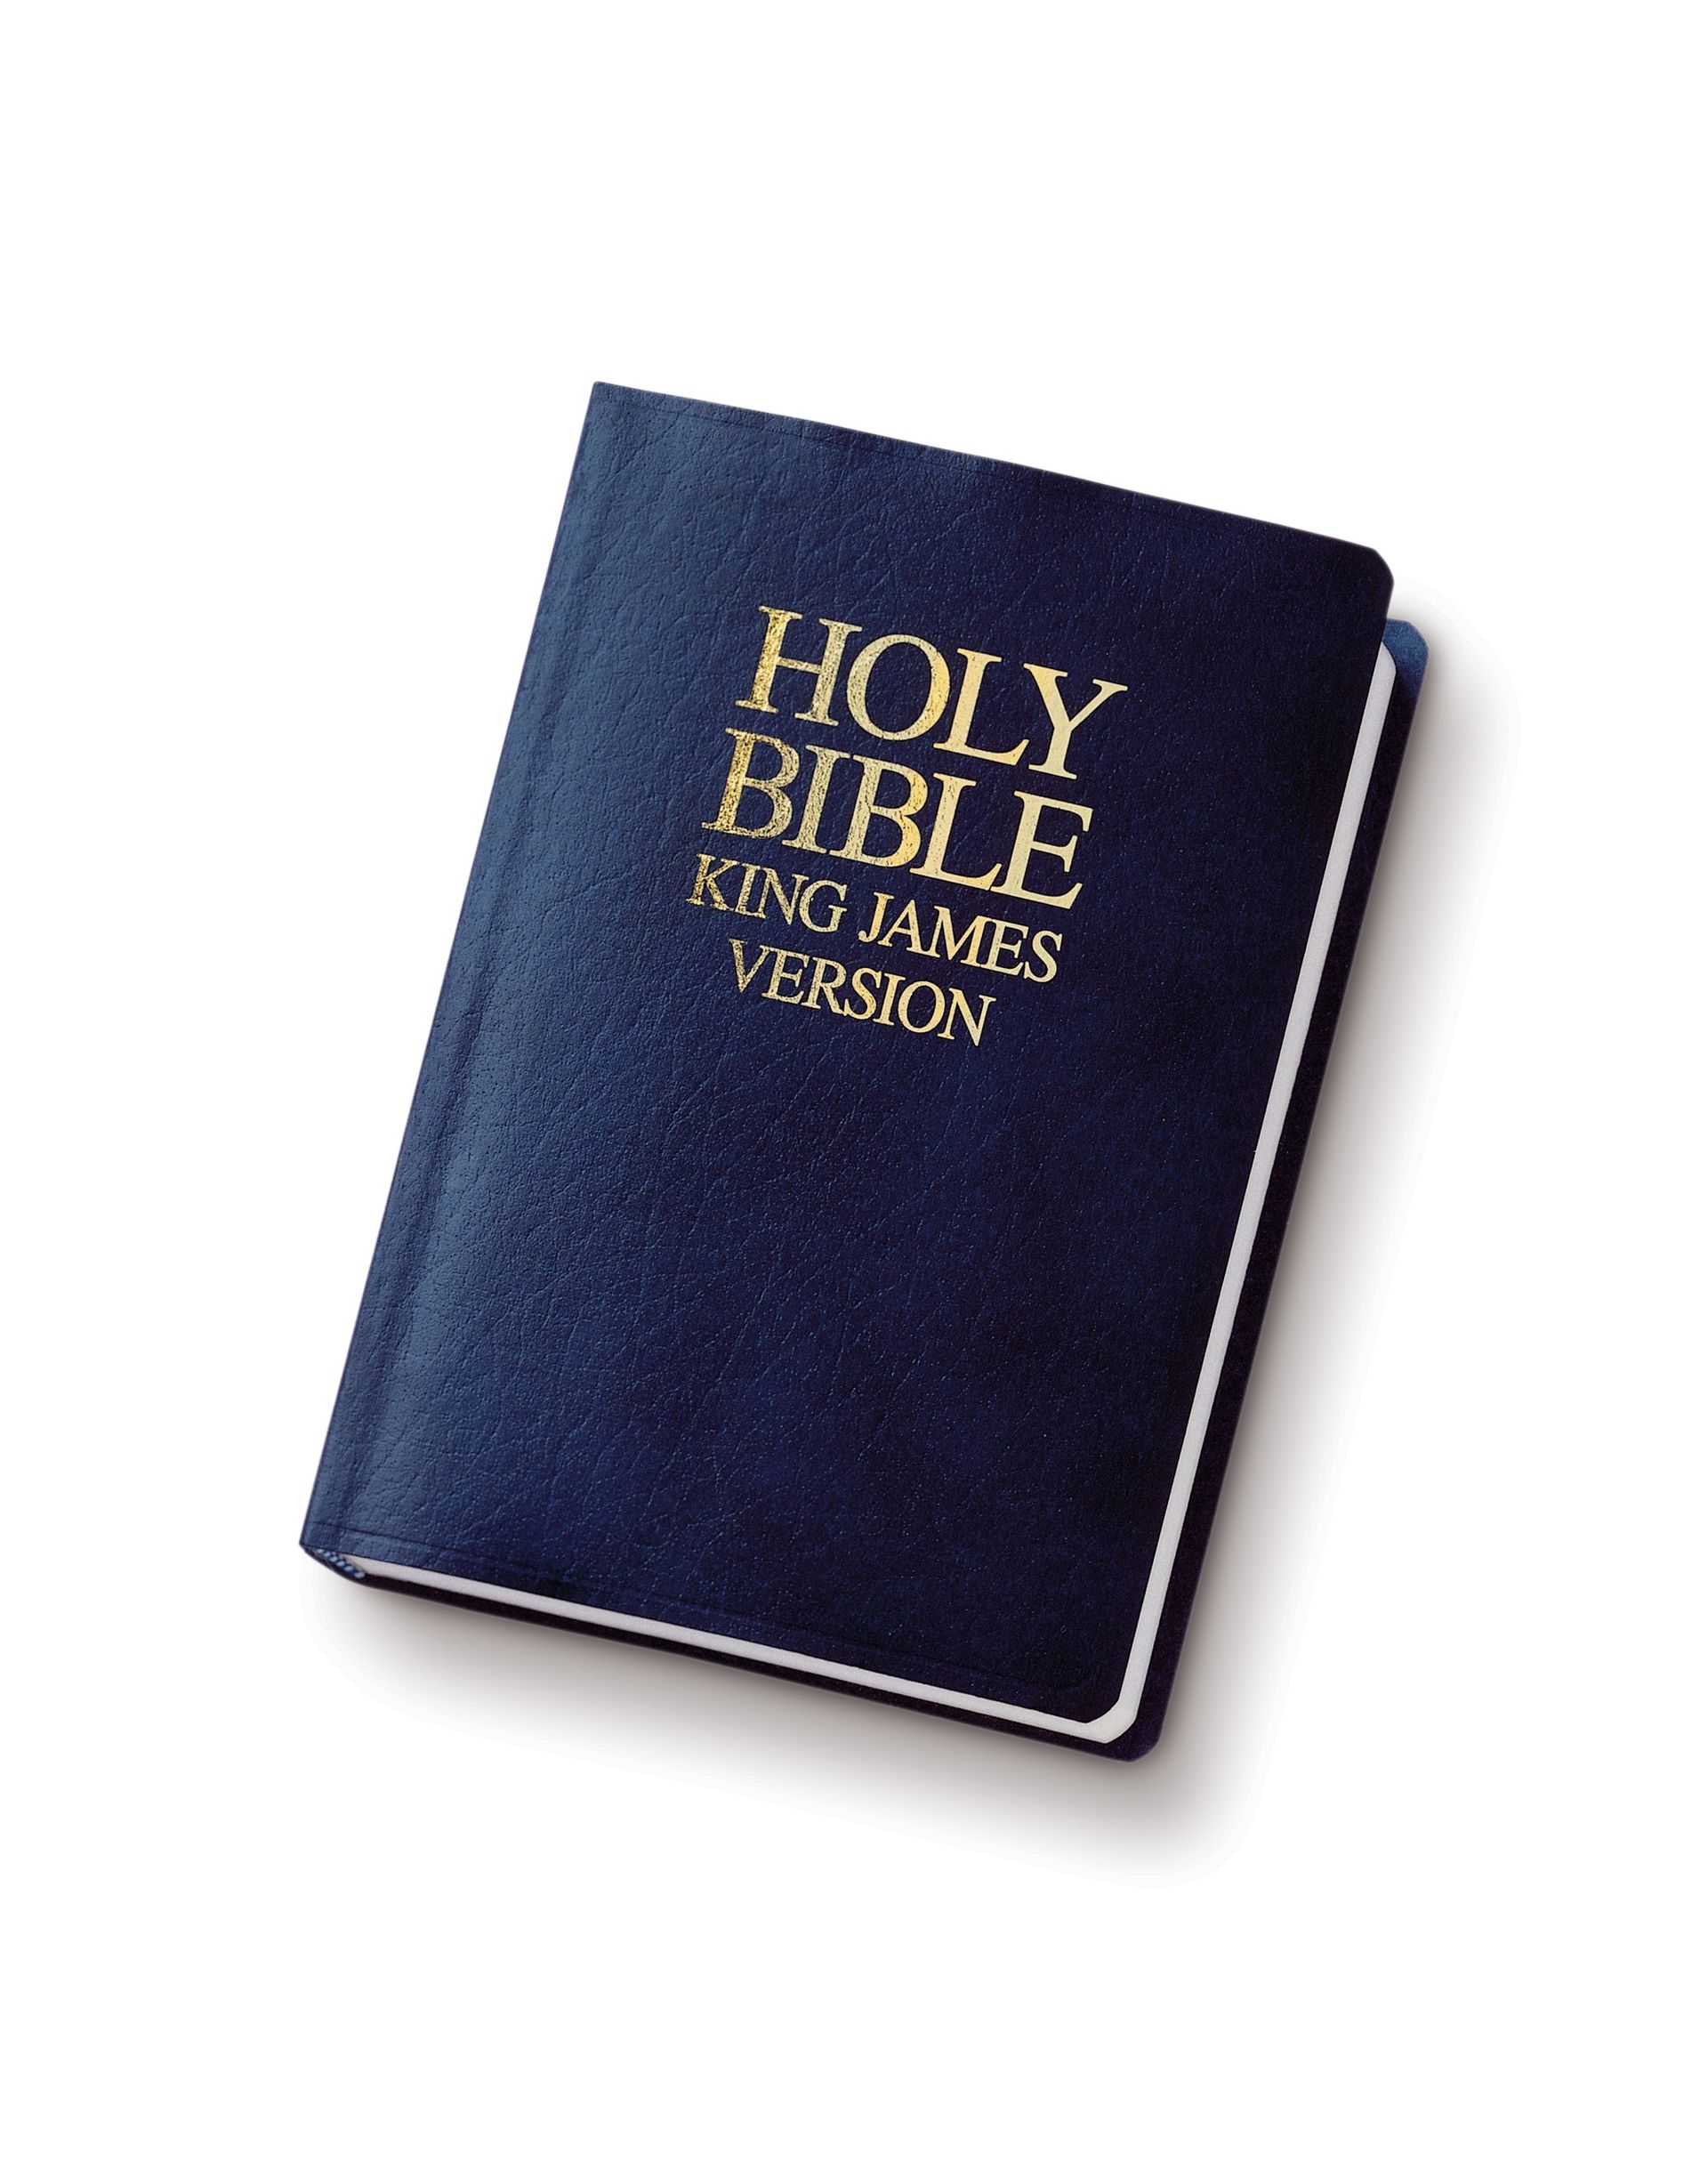 A hardcover King James Version of the Holy Bible.